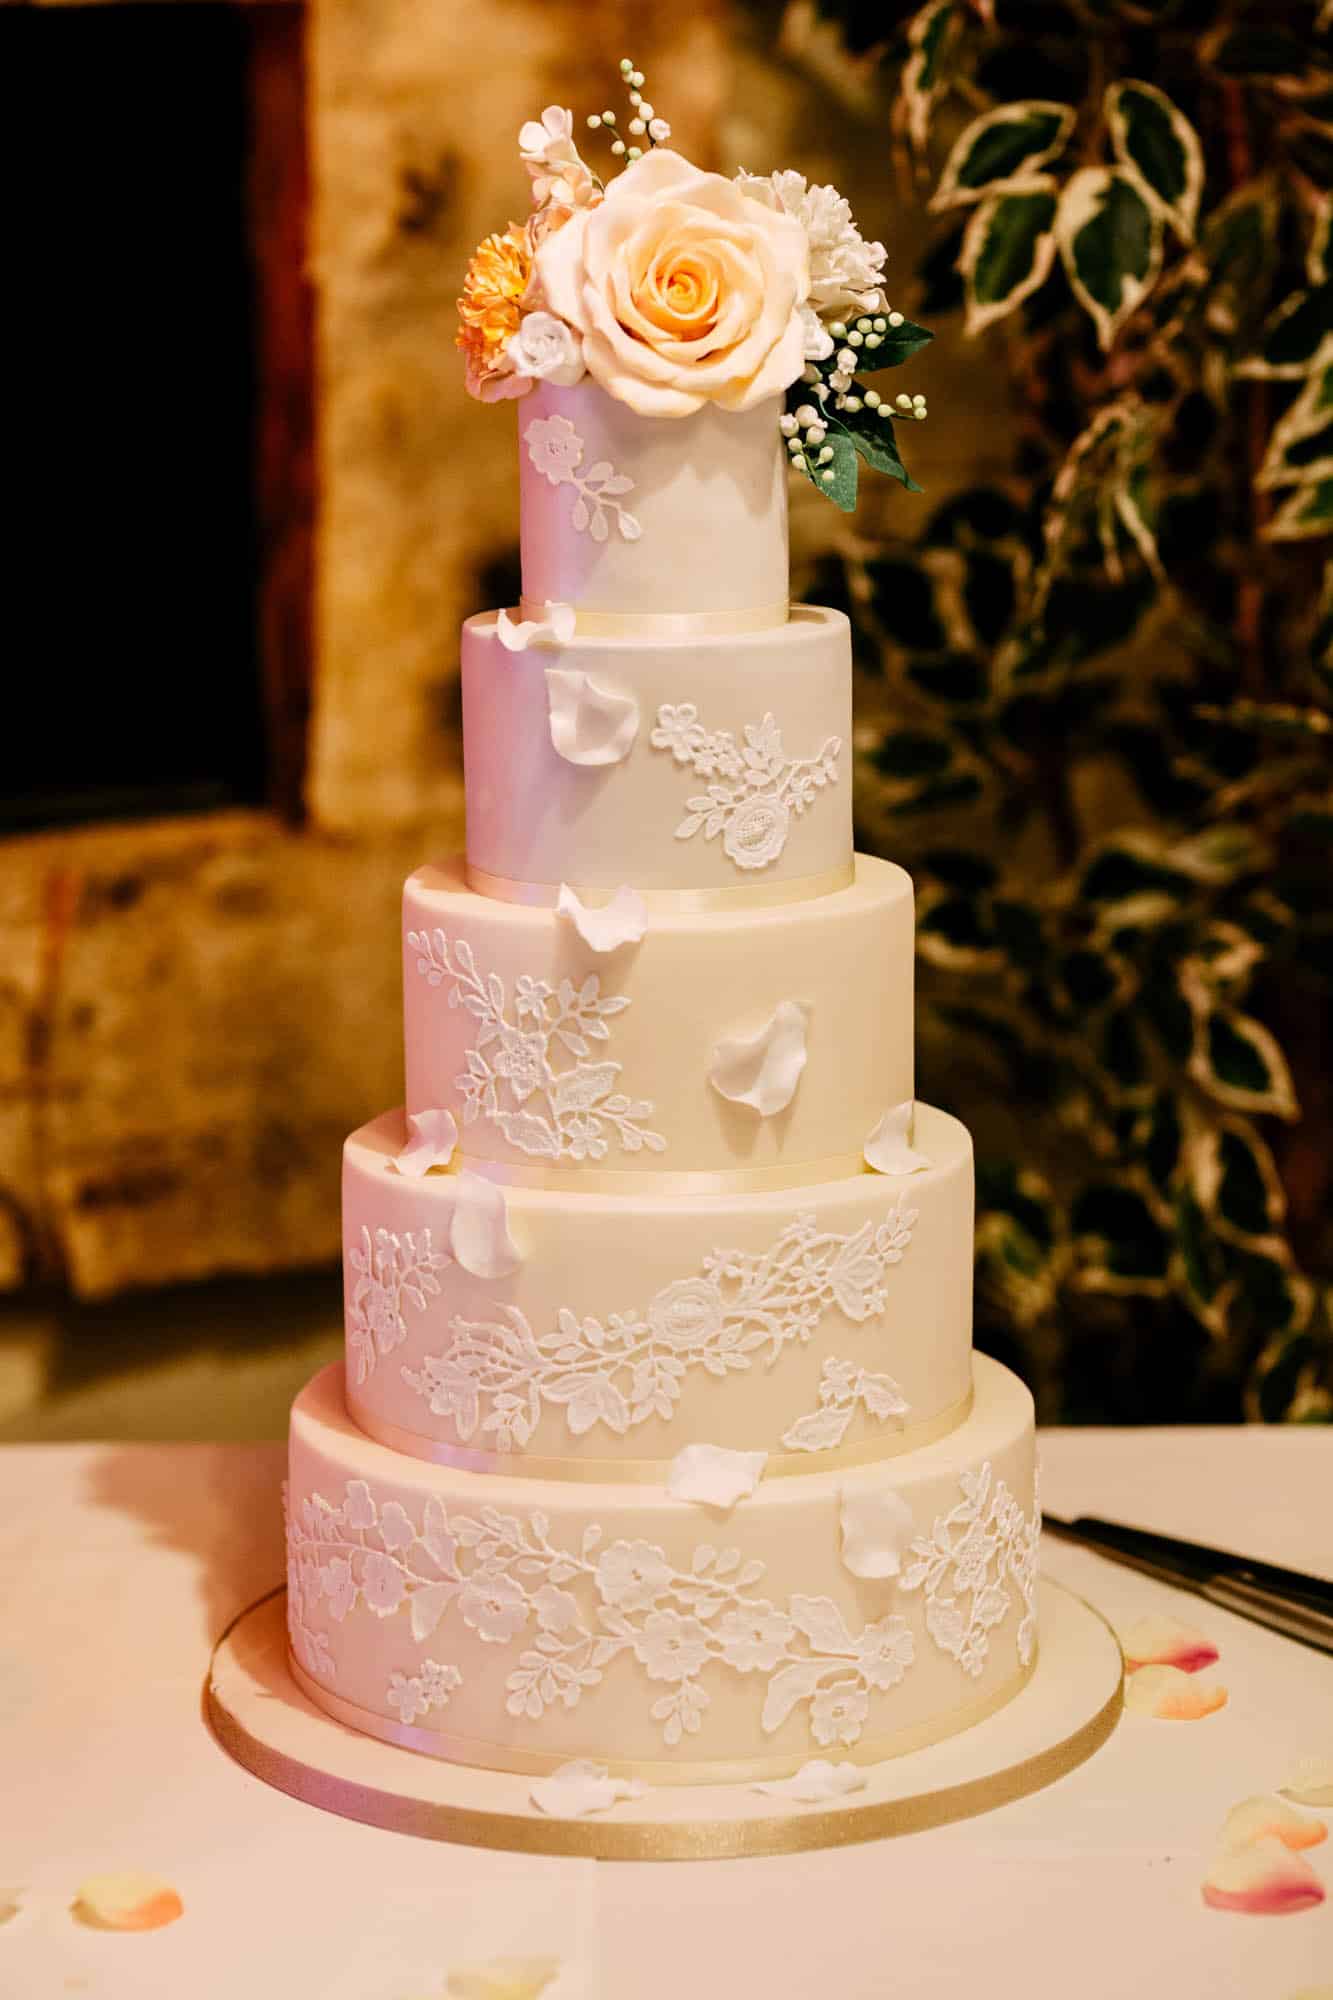 On a table is a white wedding cake, also called wedding cakes.